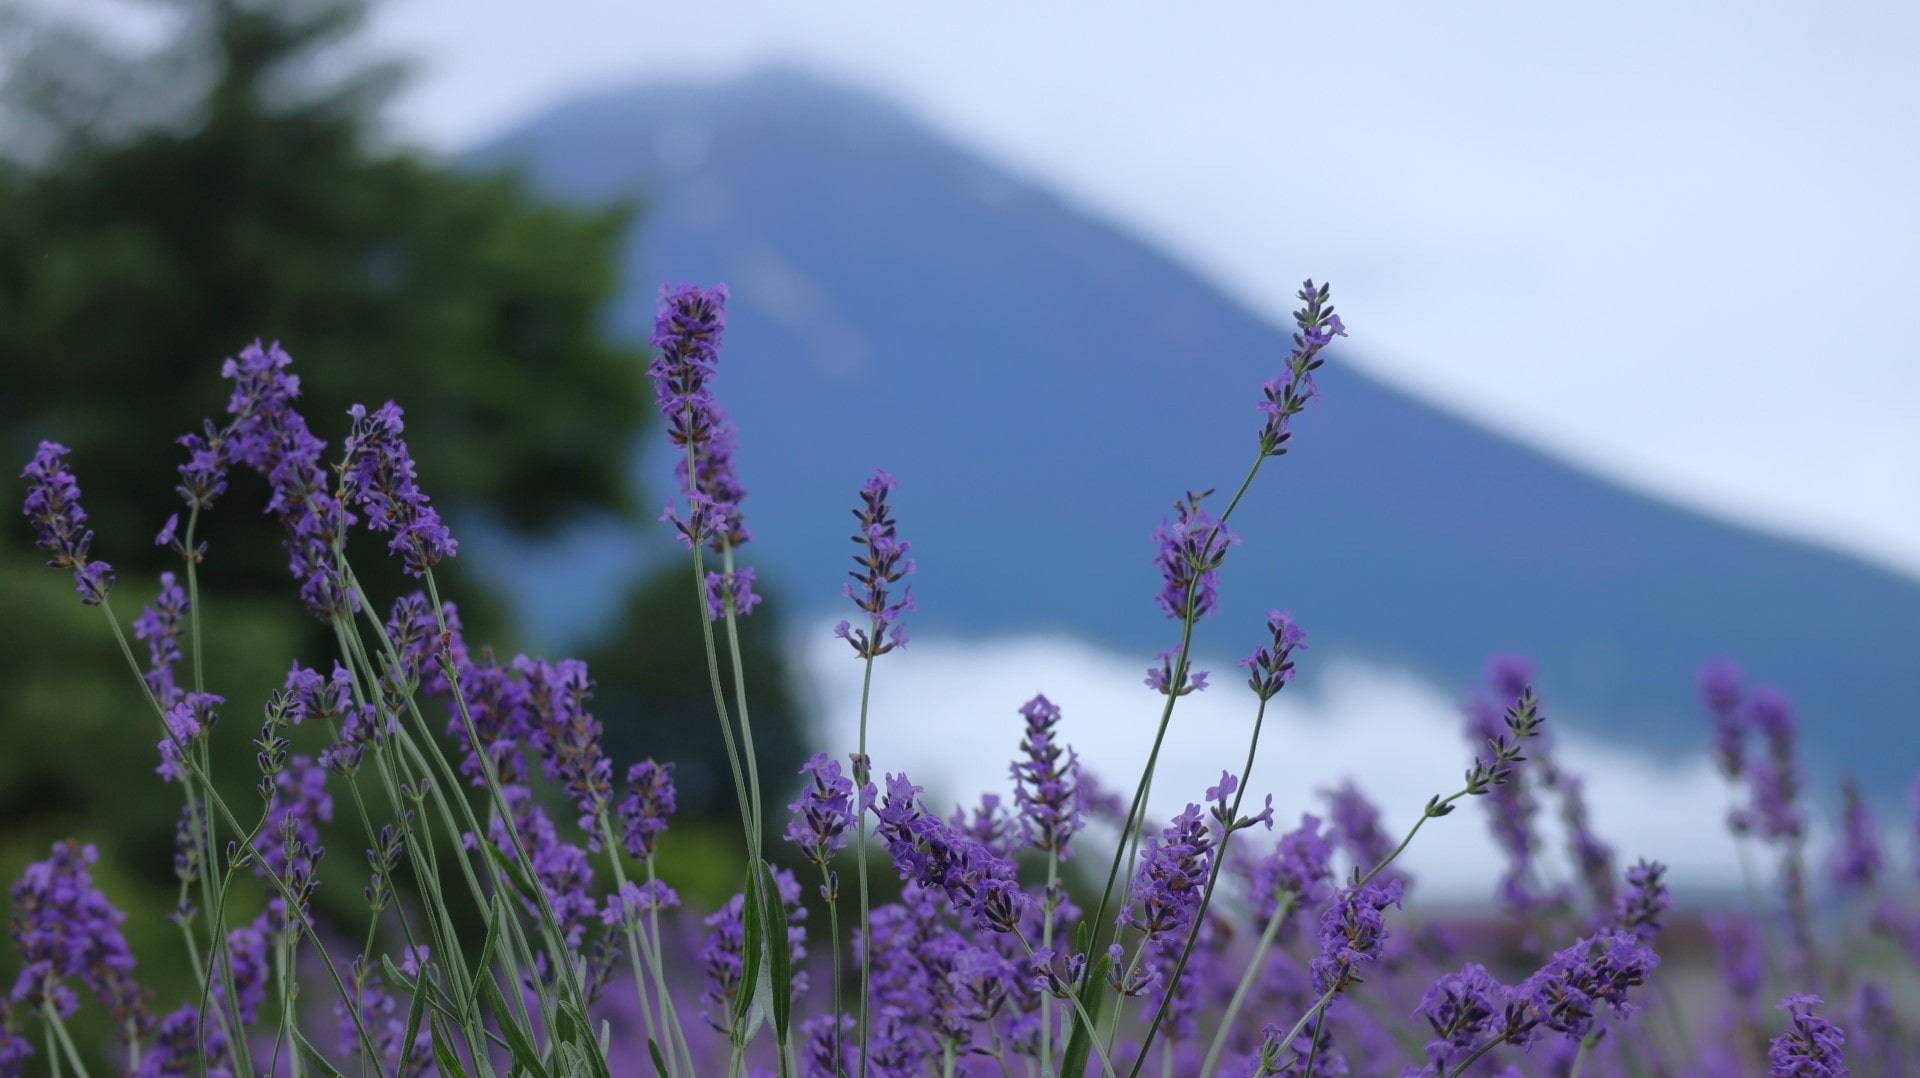 Yagizaki Park lavender fields with Mt. Fuji in the background